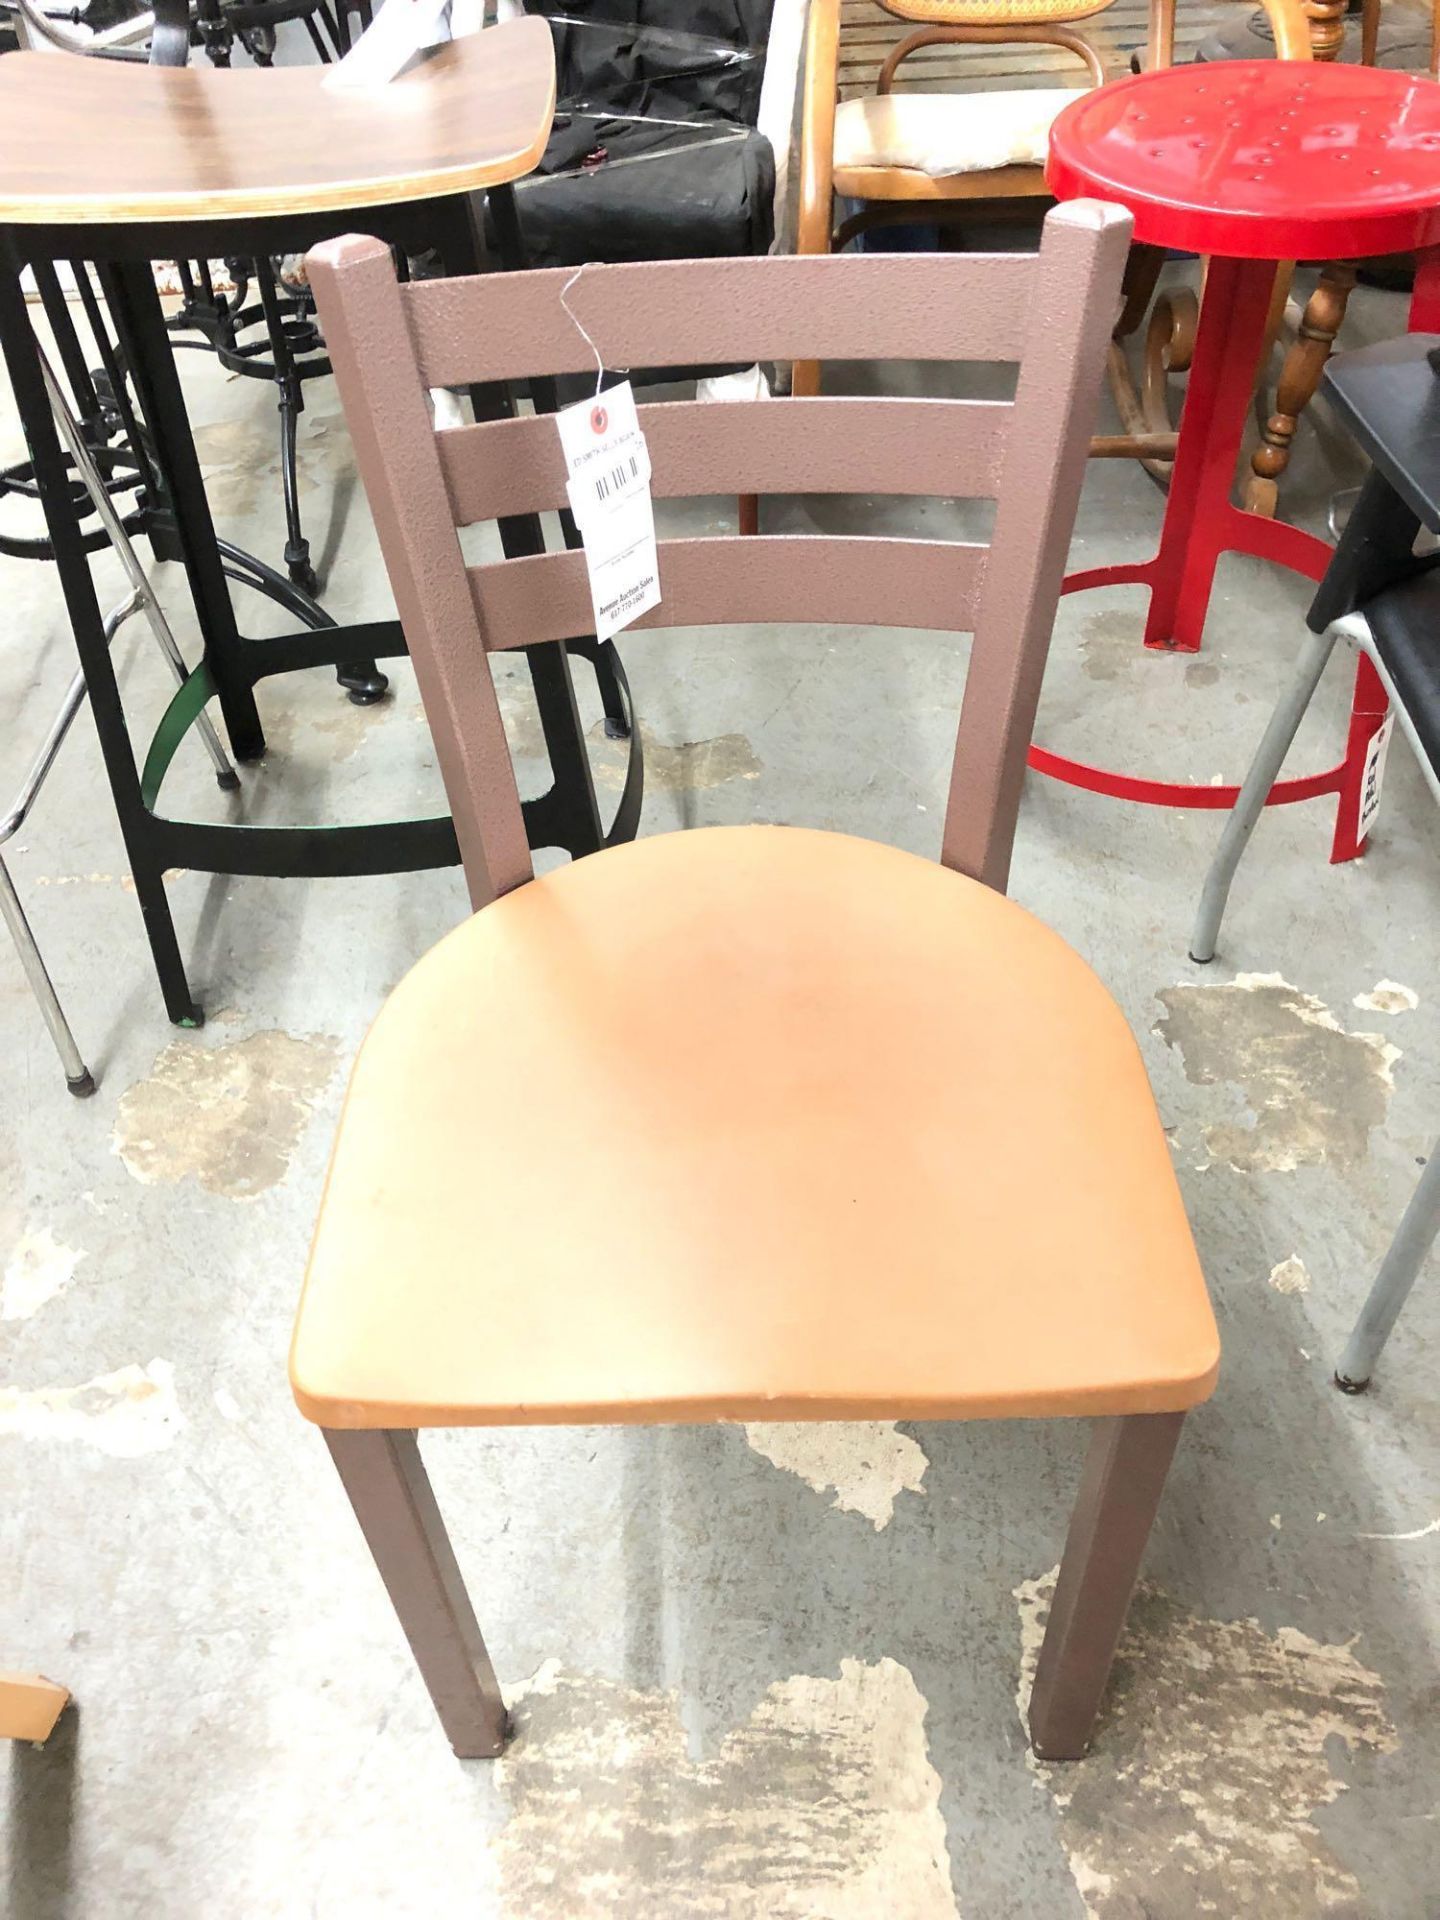 Metal chair with plastic seat